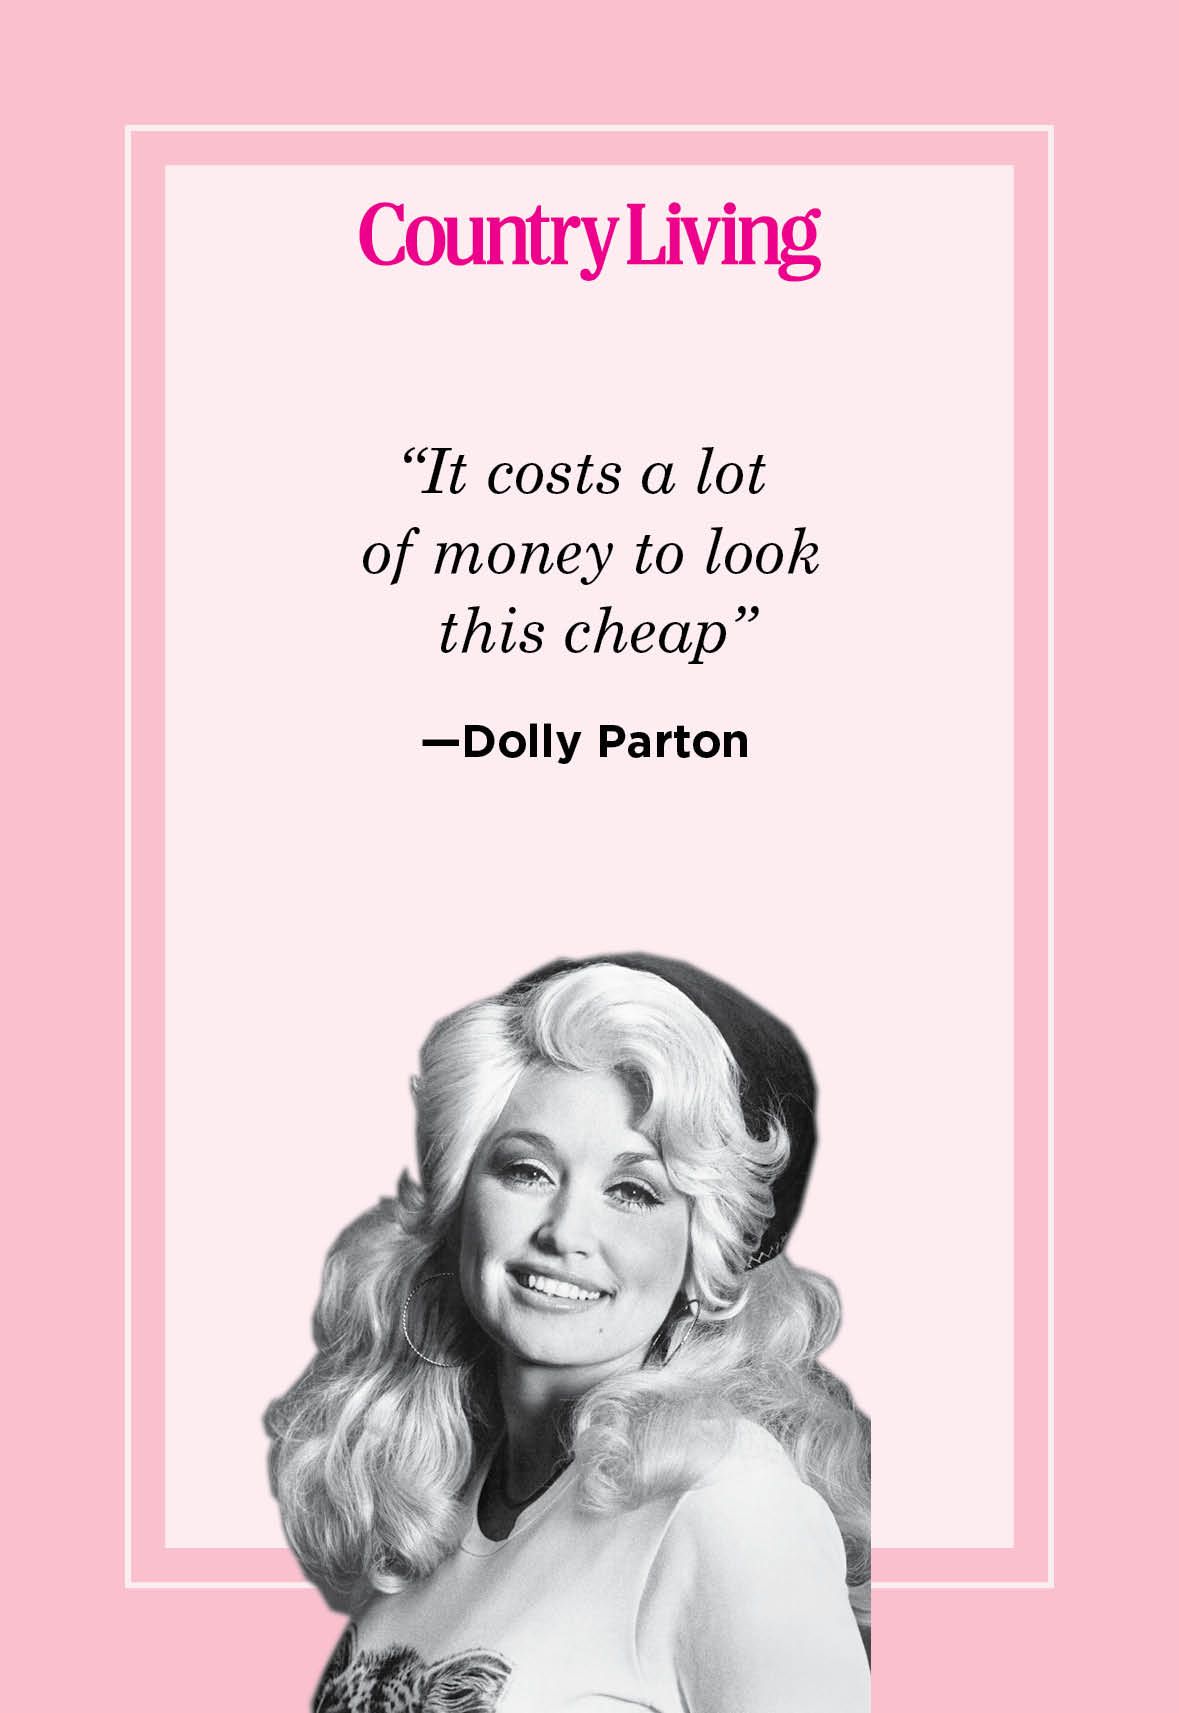 38 Inspiring Dolly Parton Quotes to Live By